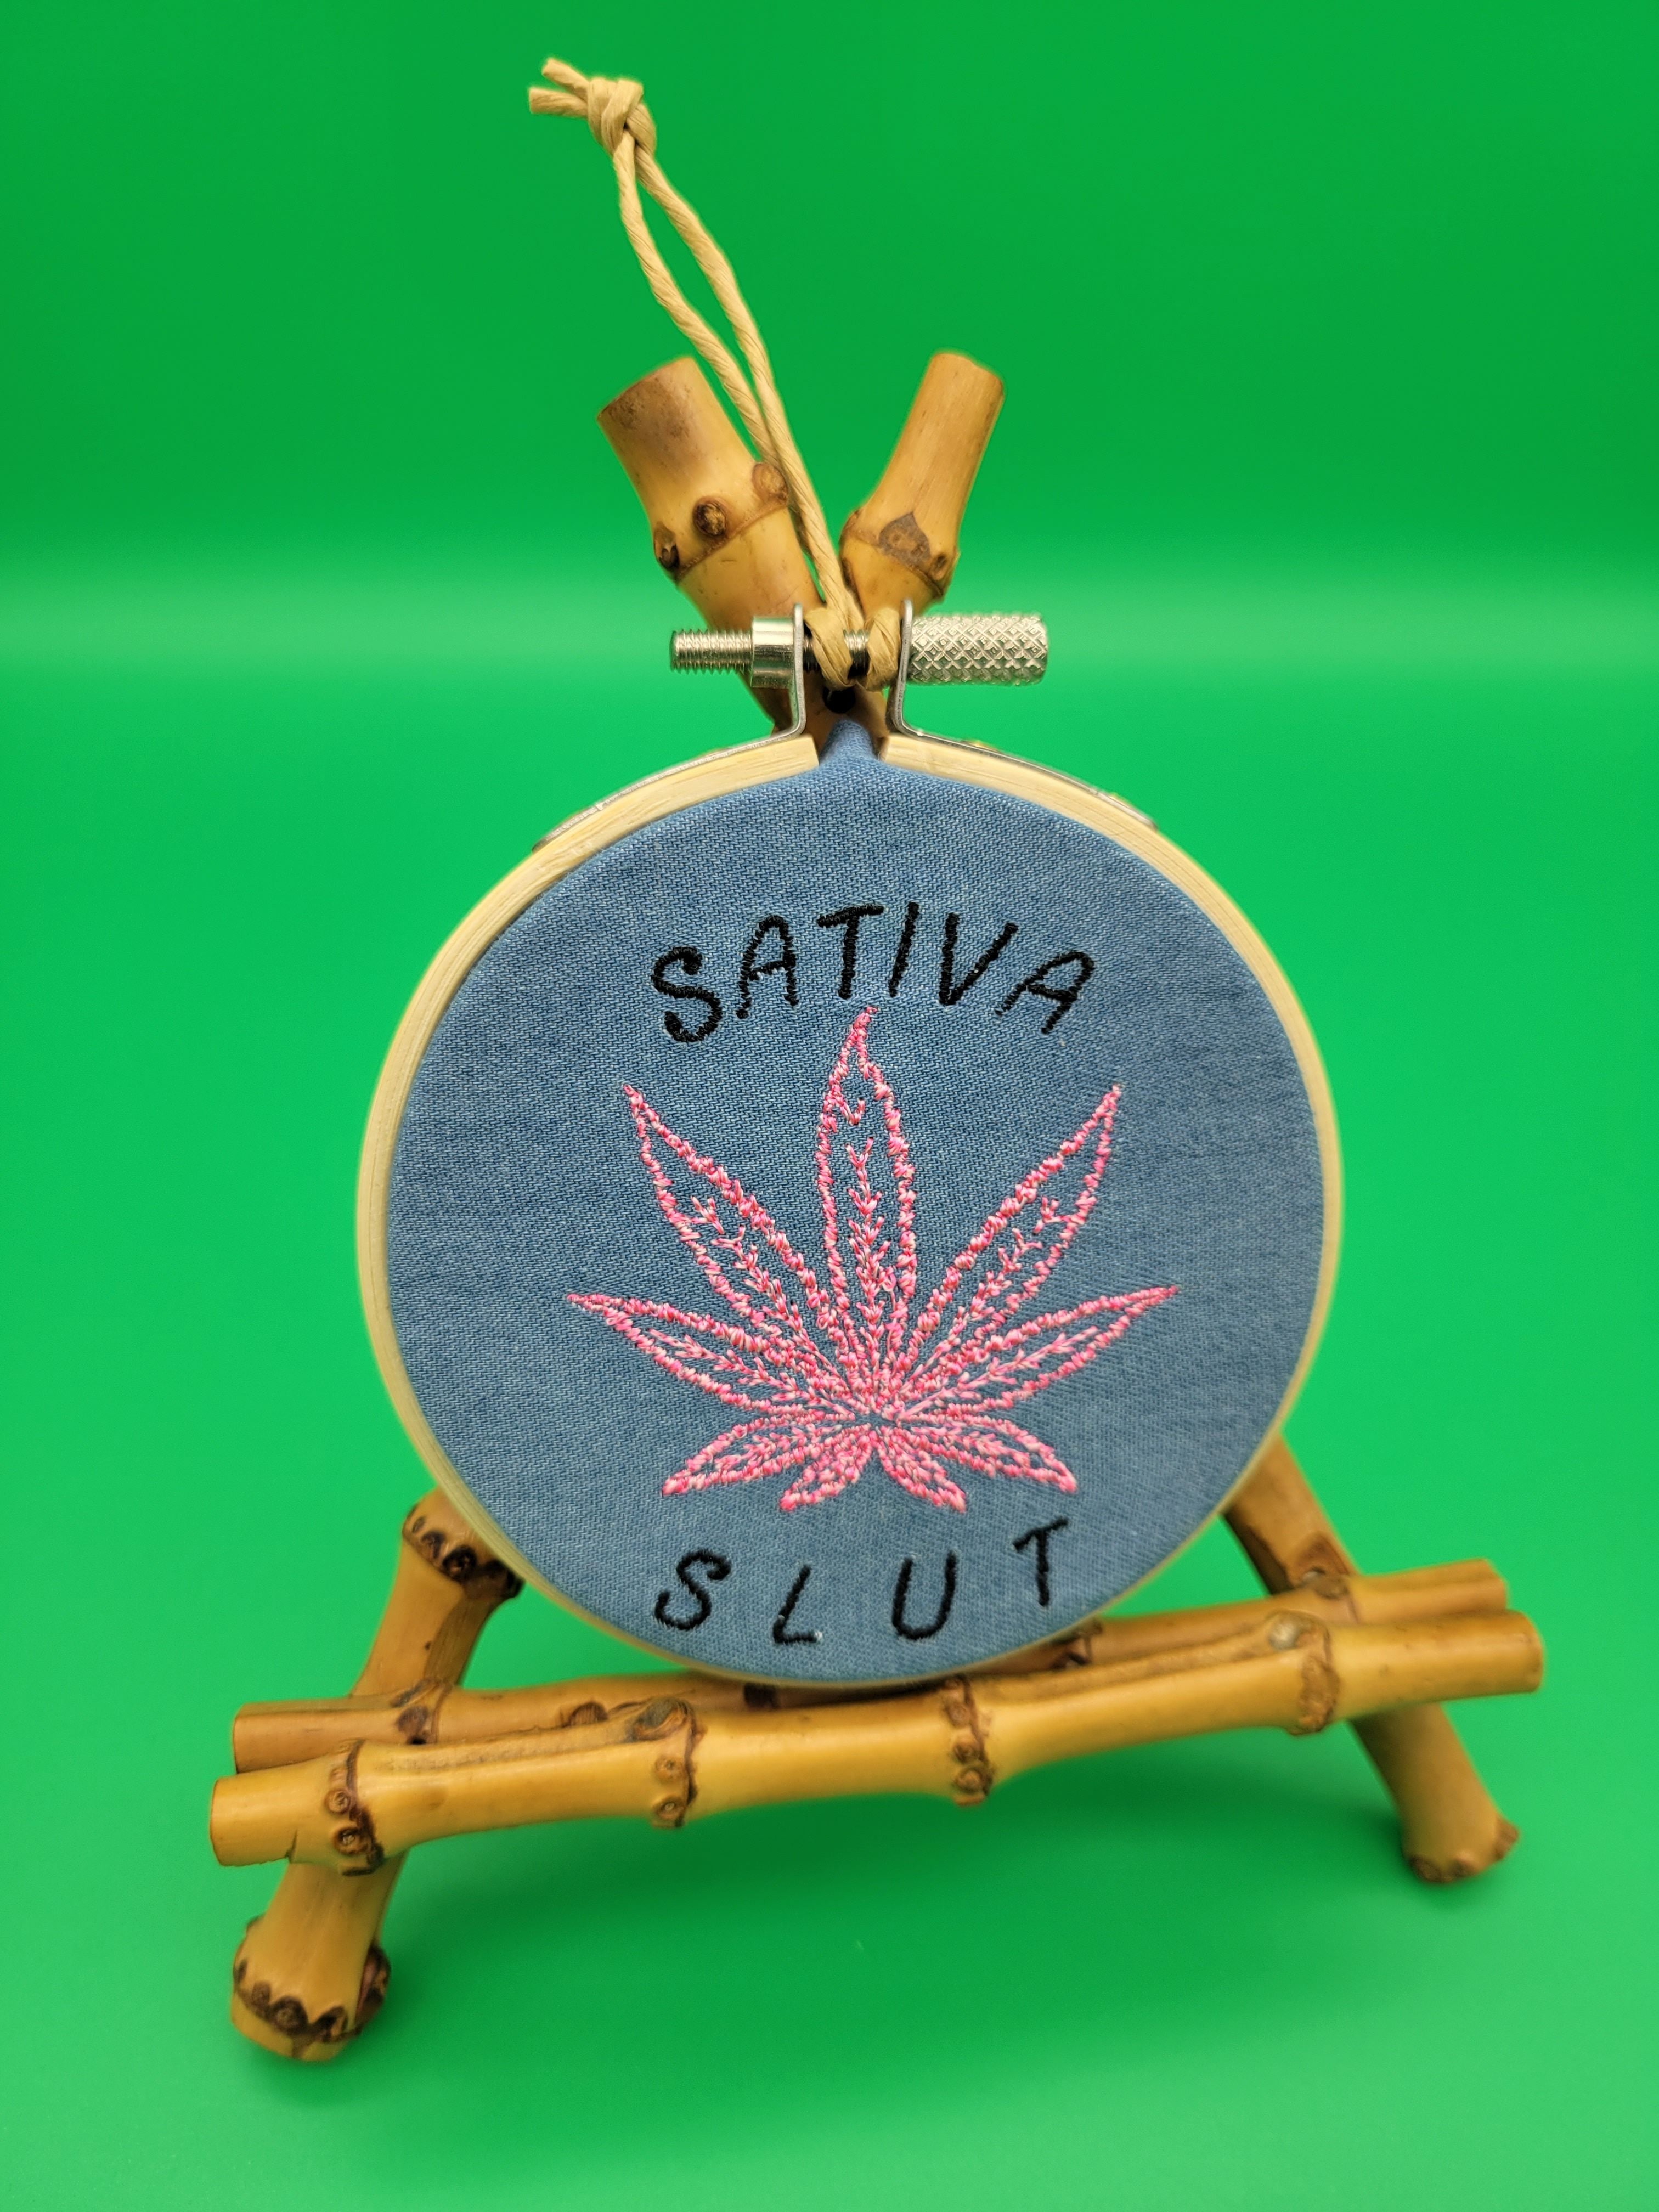 Customizable "Cannabis Leaf" Expressions